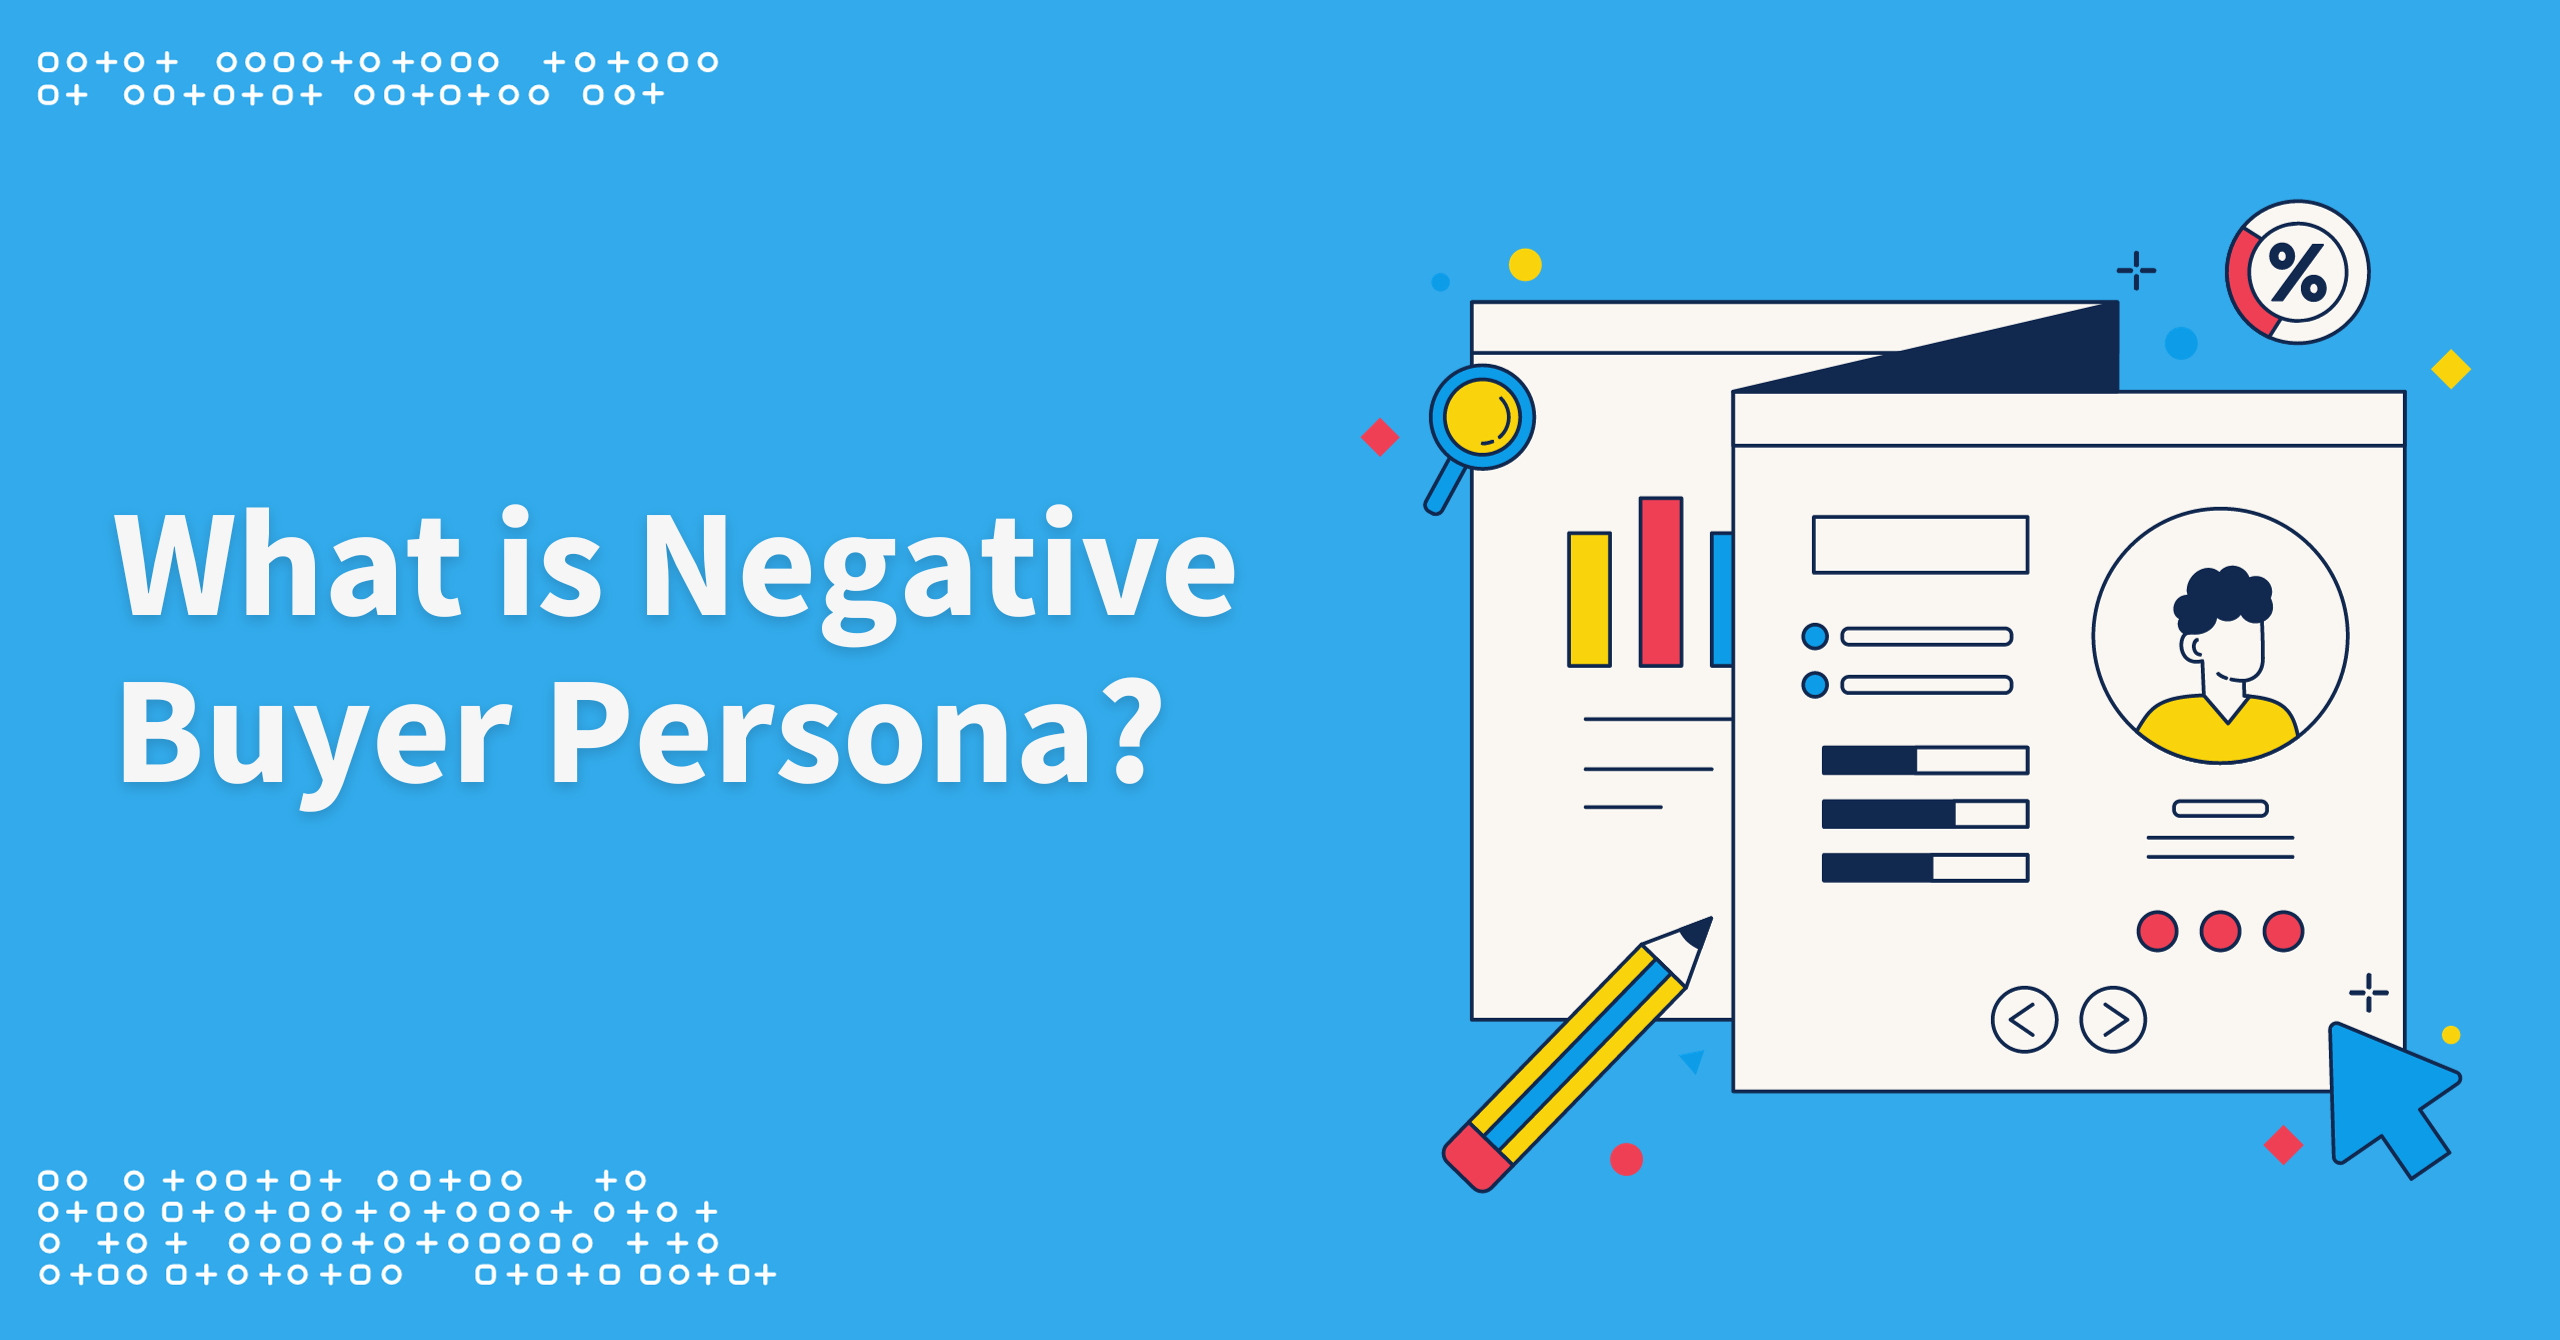 What Is a Negative Buyer Persona?